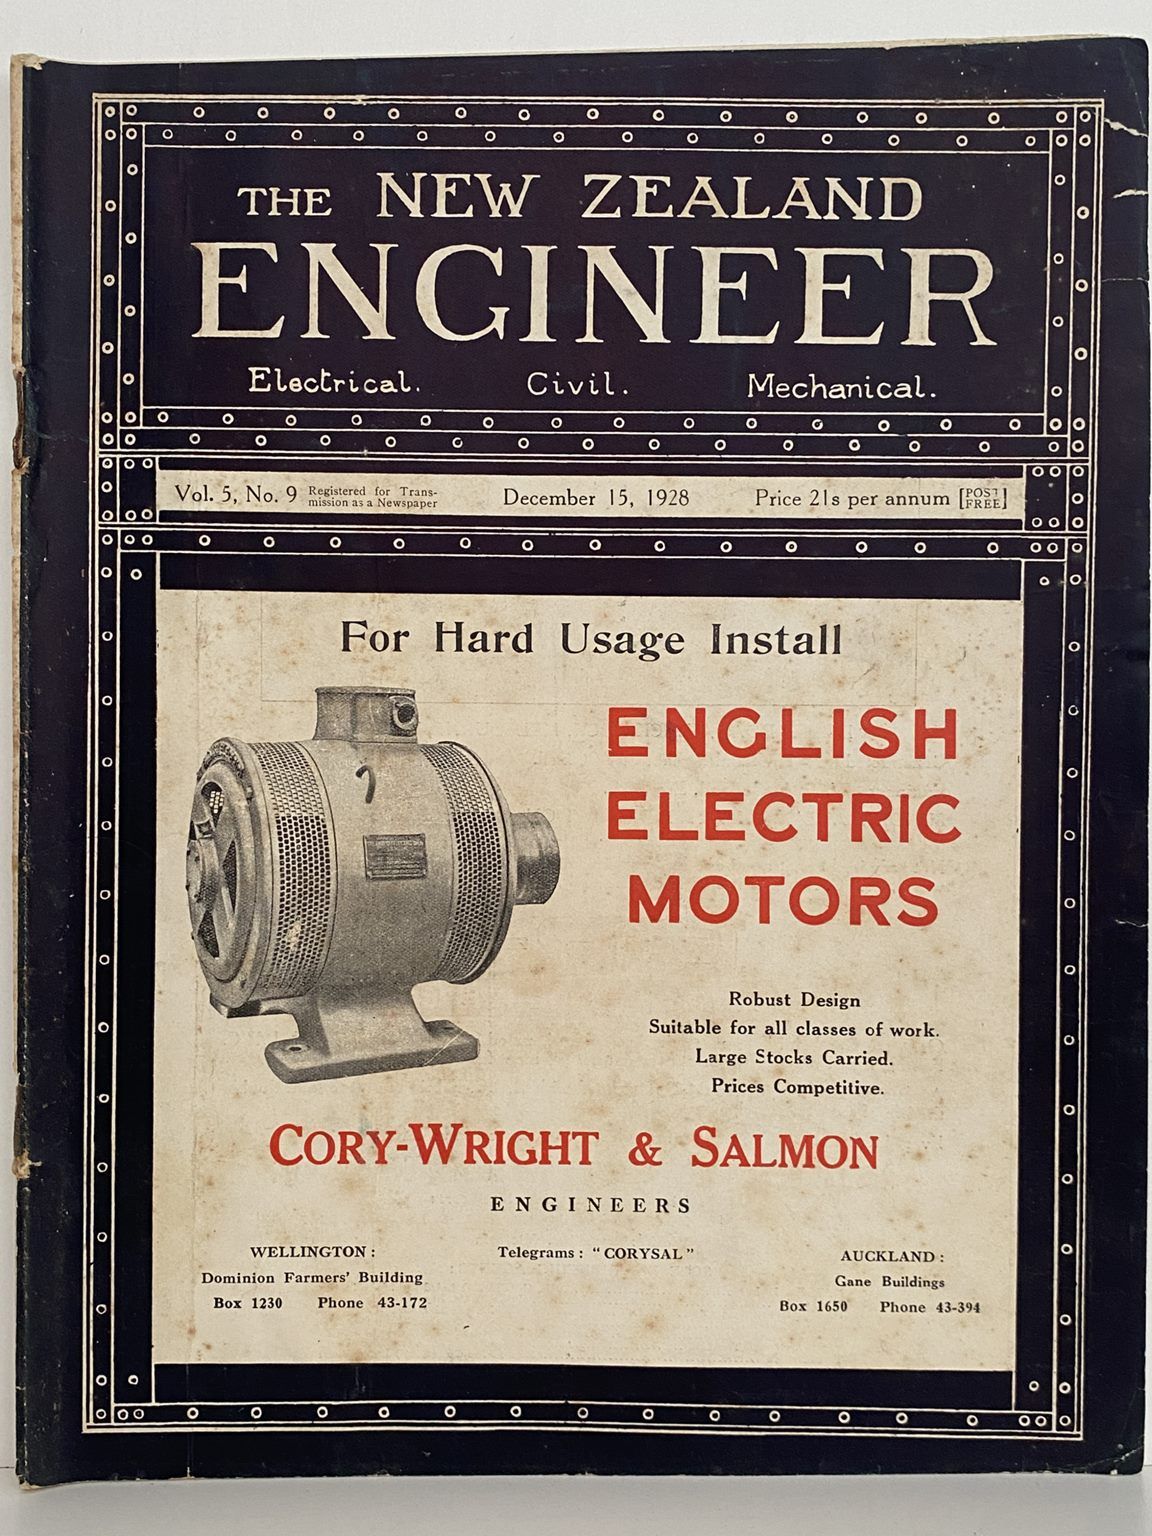 OLD MAGAZINE: The New Zealand Engineer Vol. 5, No. 9 - 15 December 1928